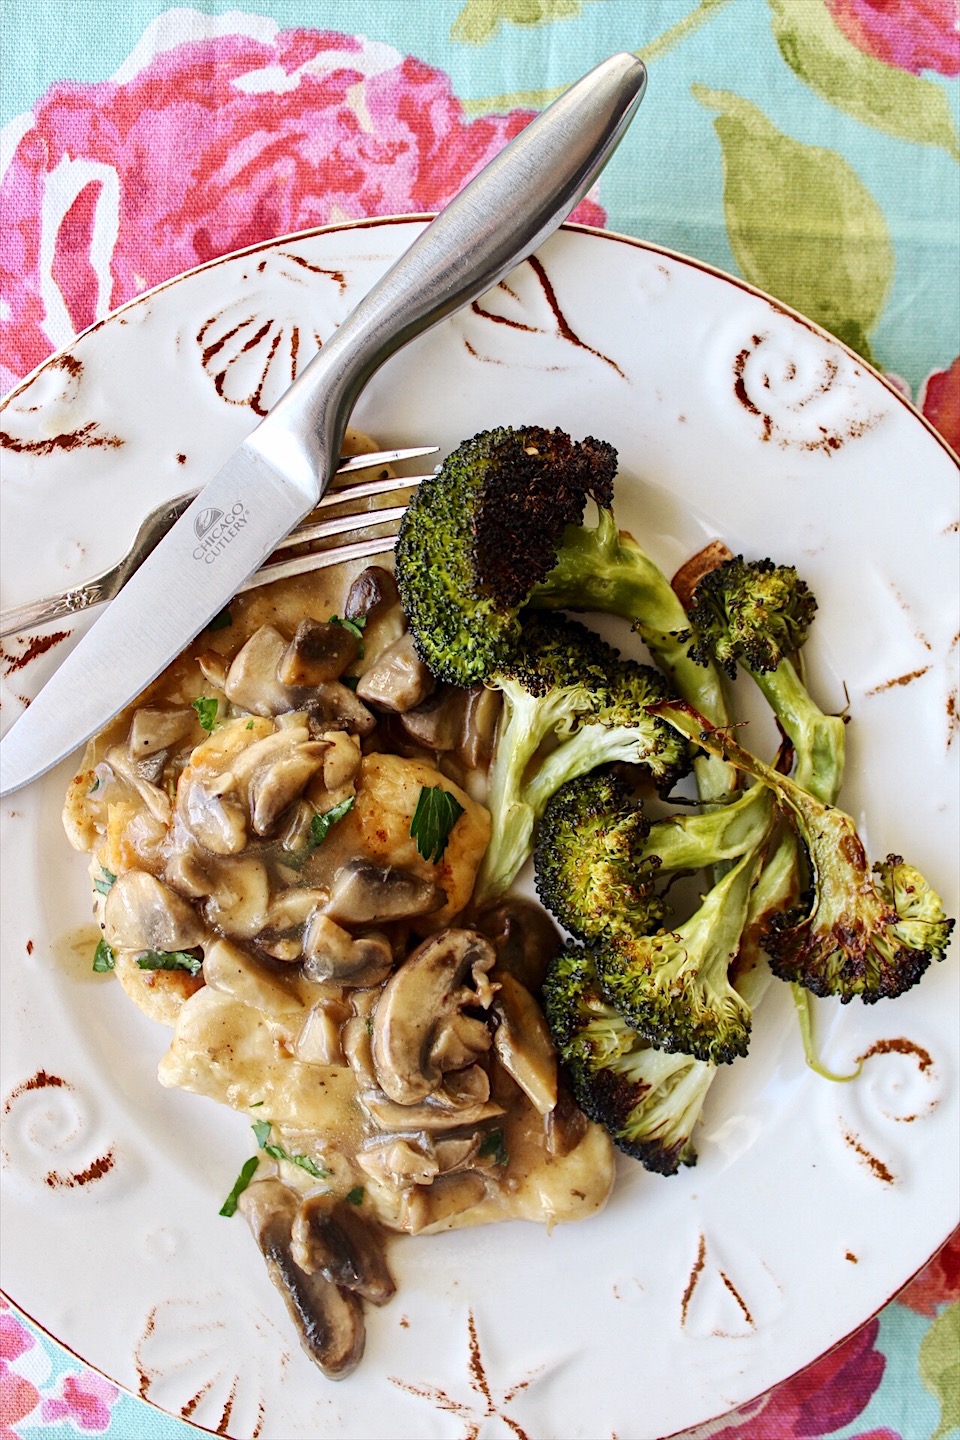 Chicken and Mushrooms with Garlic Roasted Broccoli